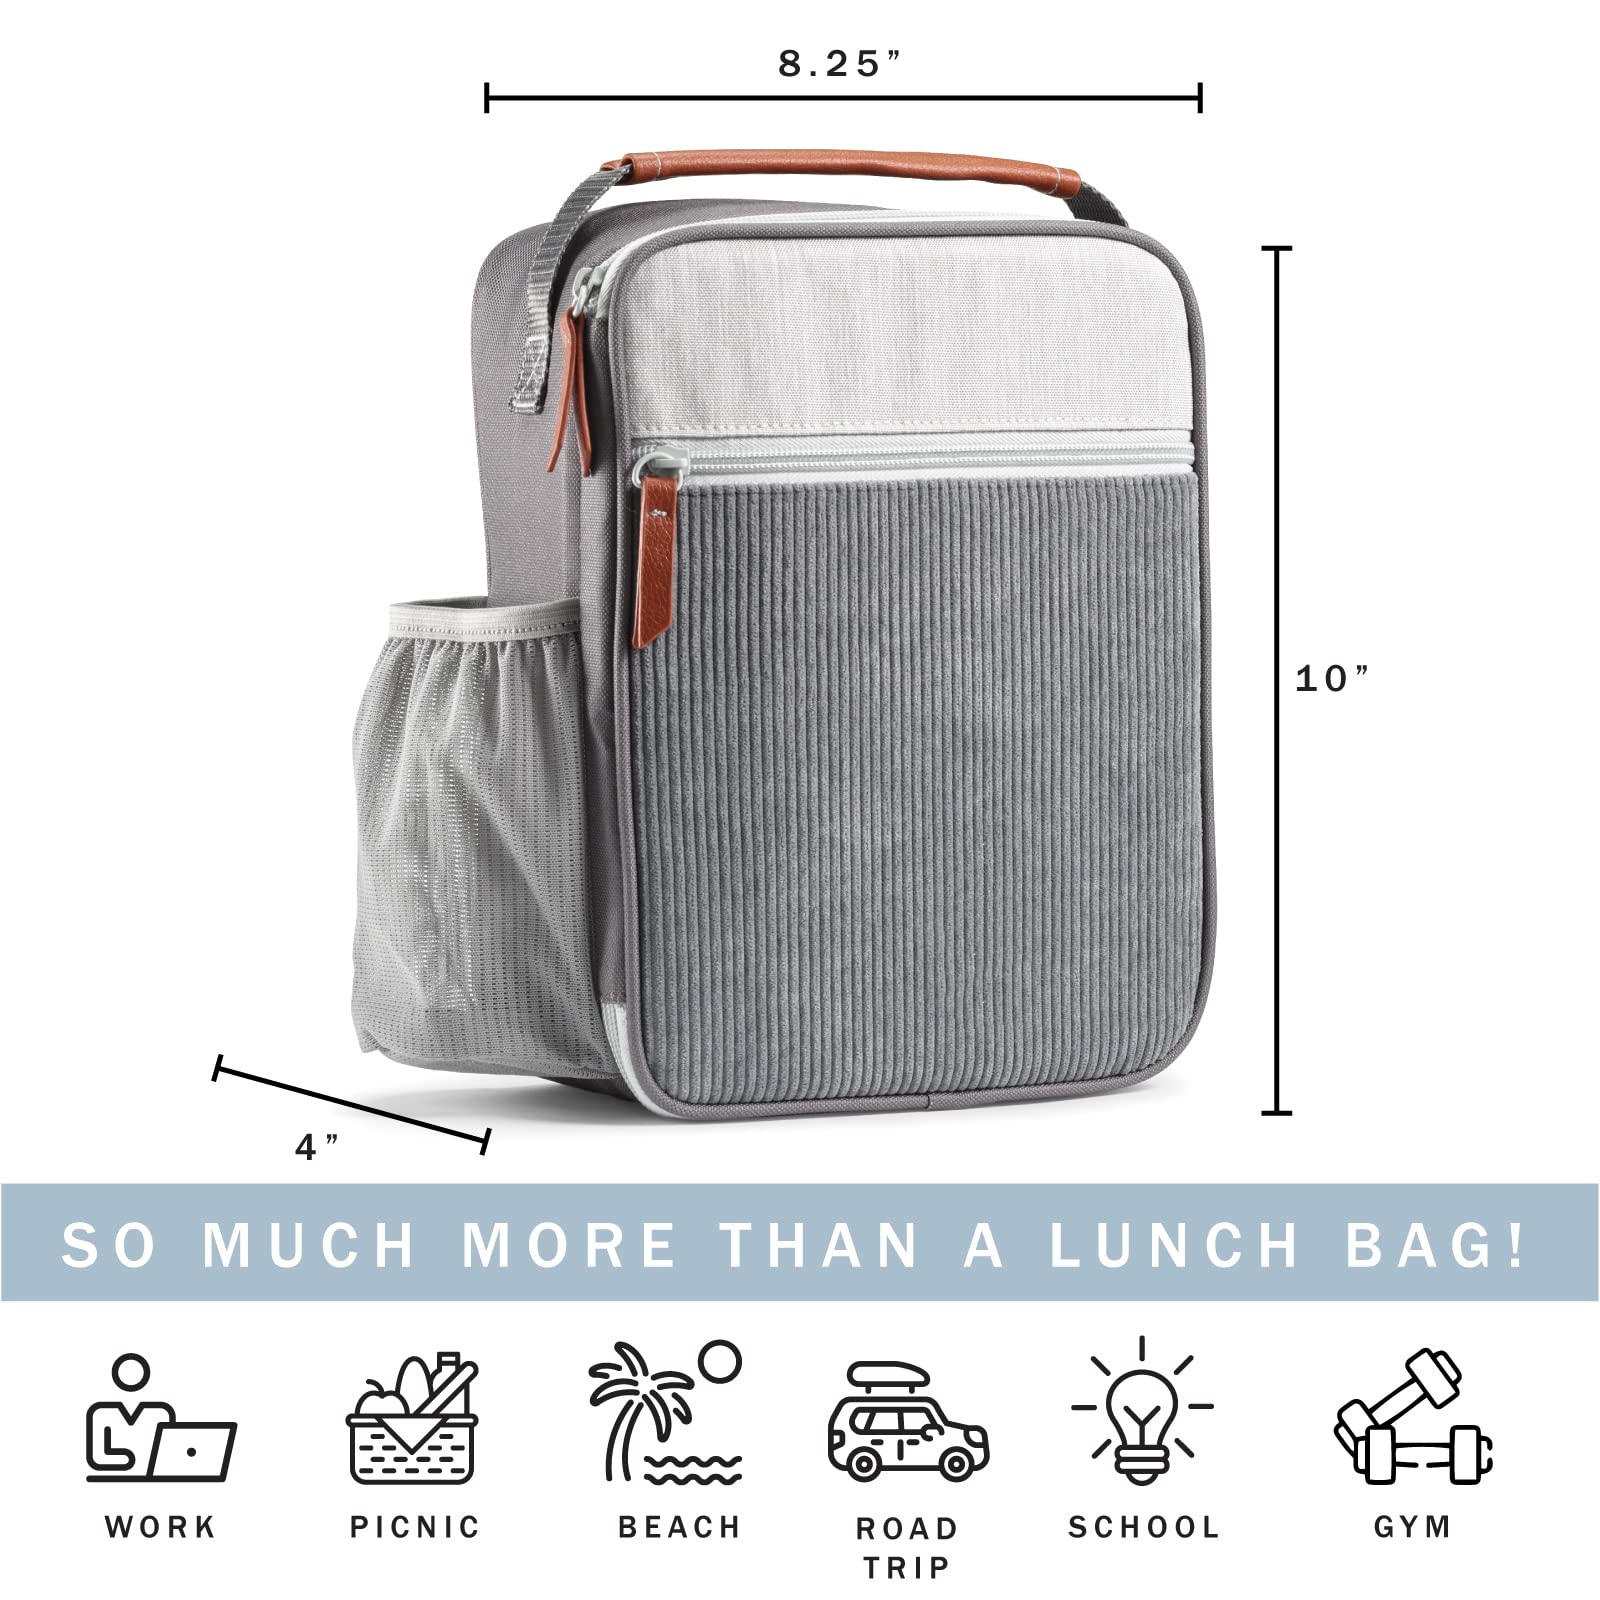 School Lunch Box for Kids Product Details